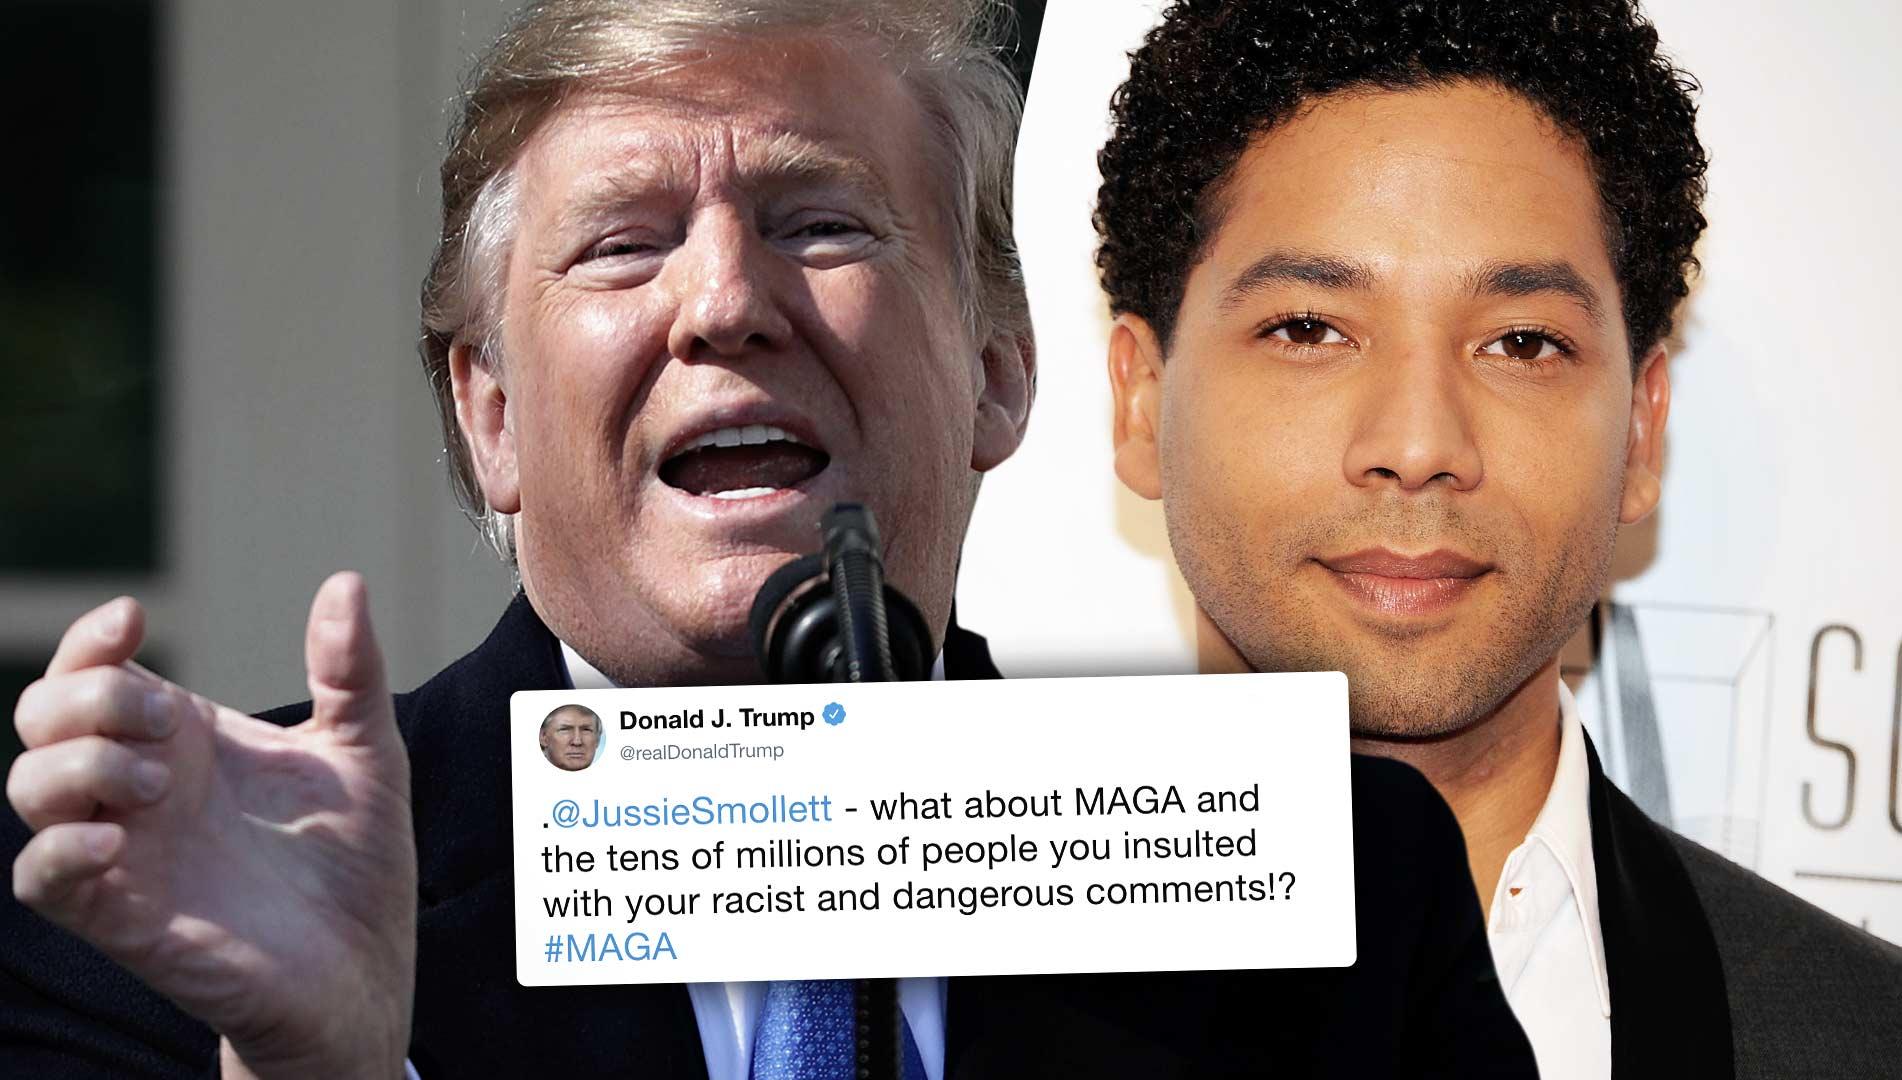 President Trump Calls Out Jussie Smollett: Where’s Your ‘MAGA’ Now?!